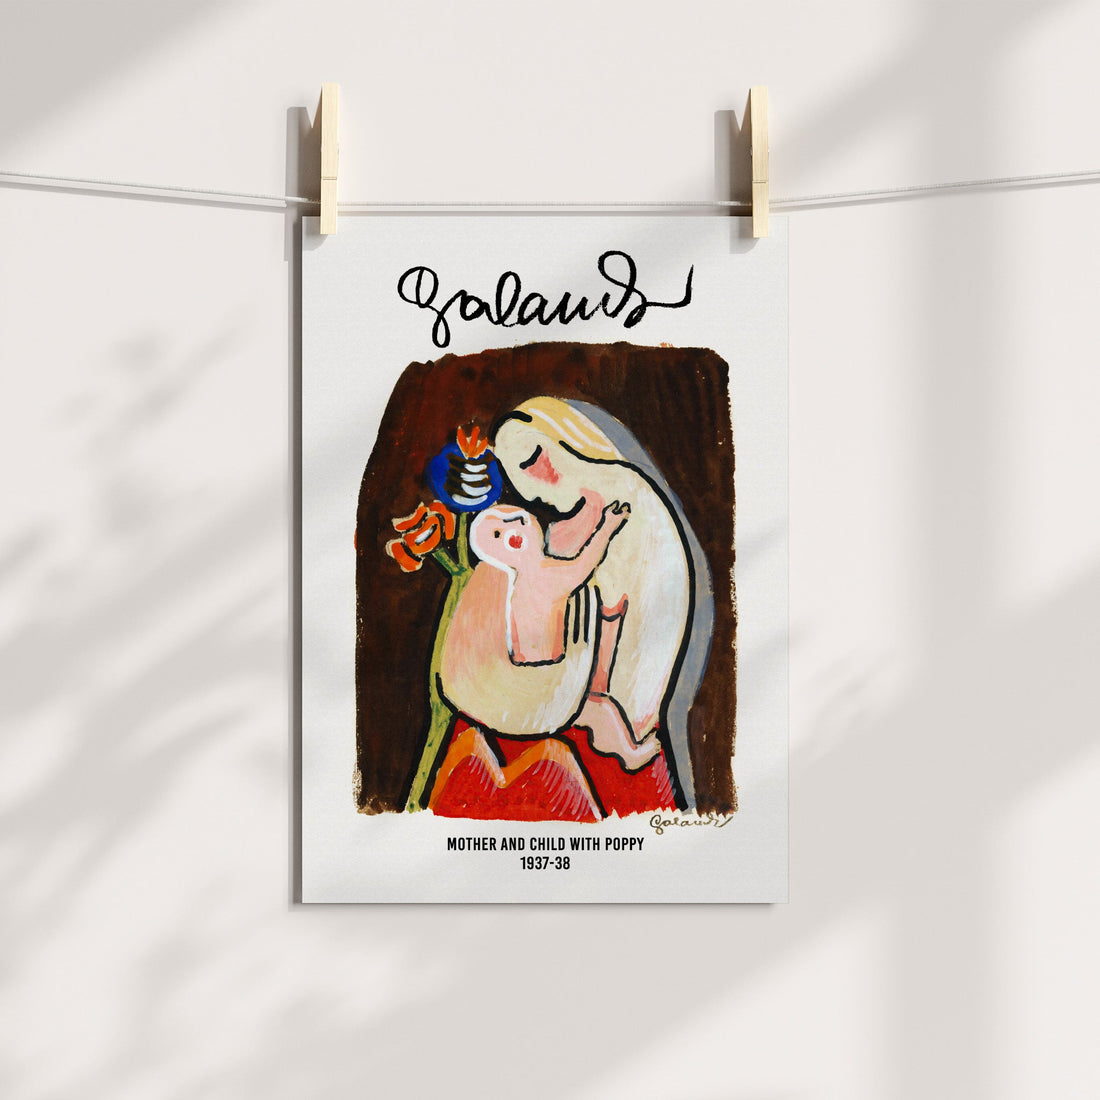 Galanda's Mother and Child with Poppy Printable Art